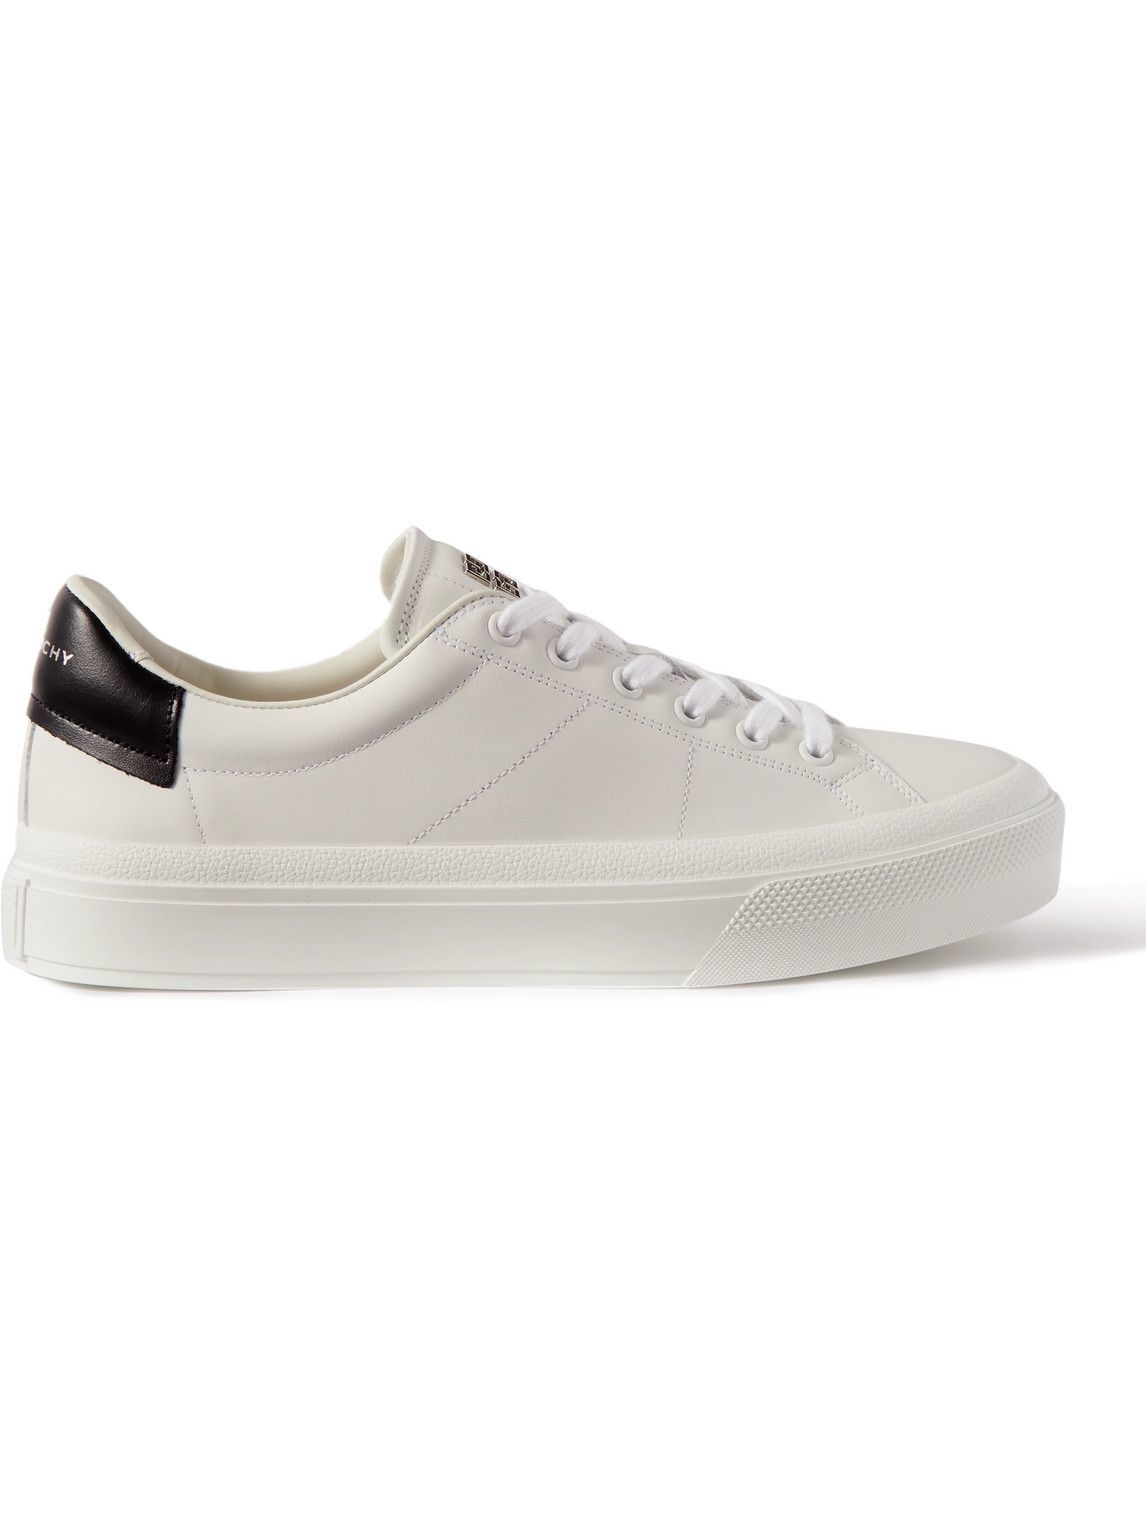 Givenchy - City Sport Leather Sneakers - White Givenchy